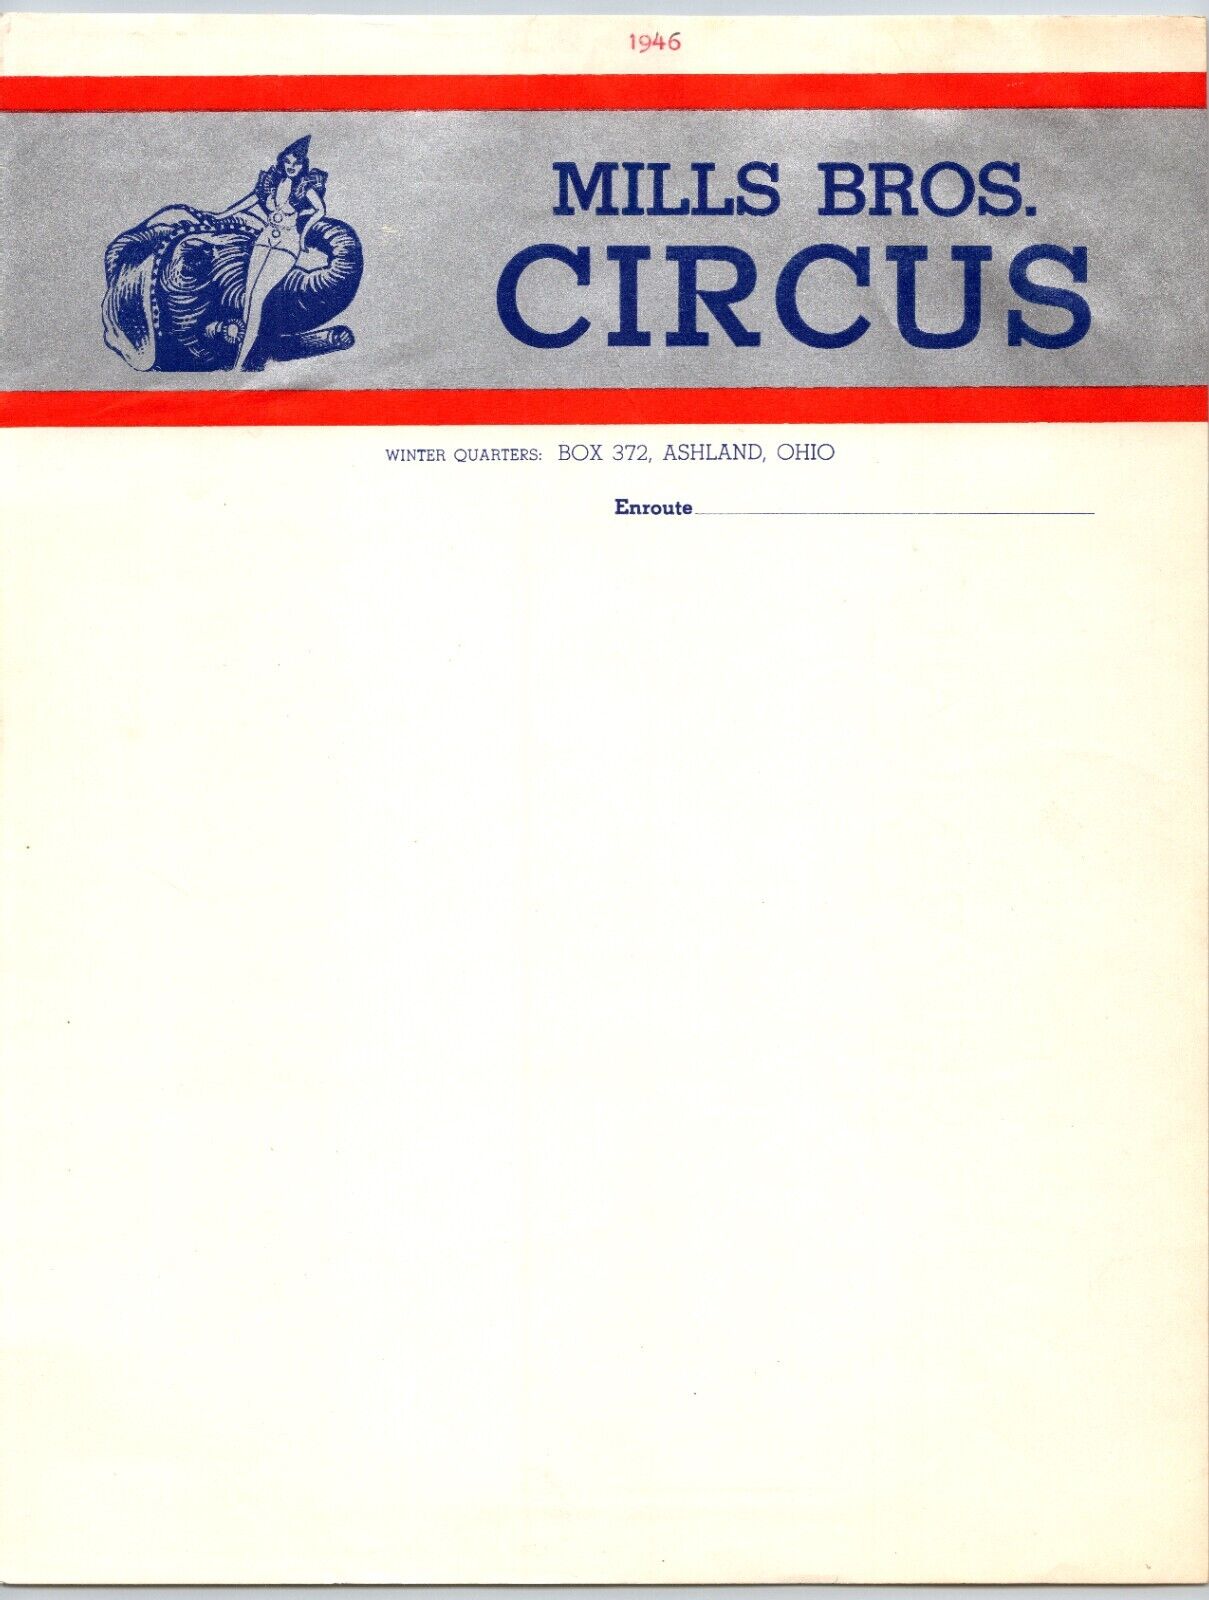 Mills Bros. Circus Letterhead c1946 Ashland, OH w/ Solid Silver Ink Background